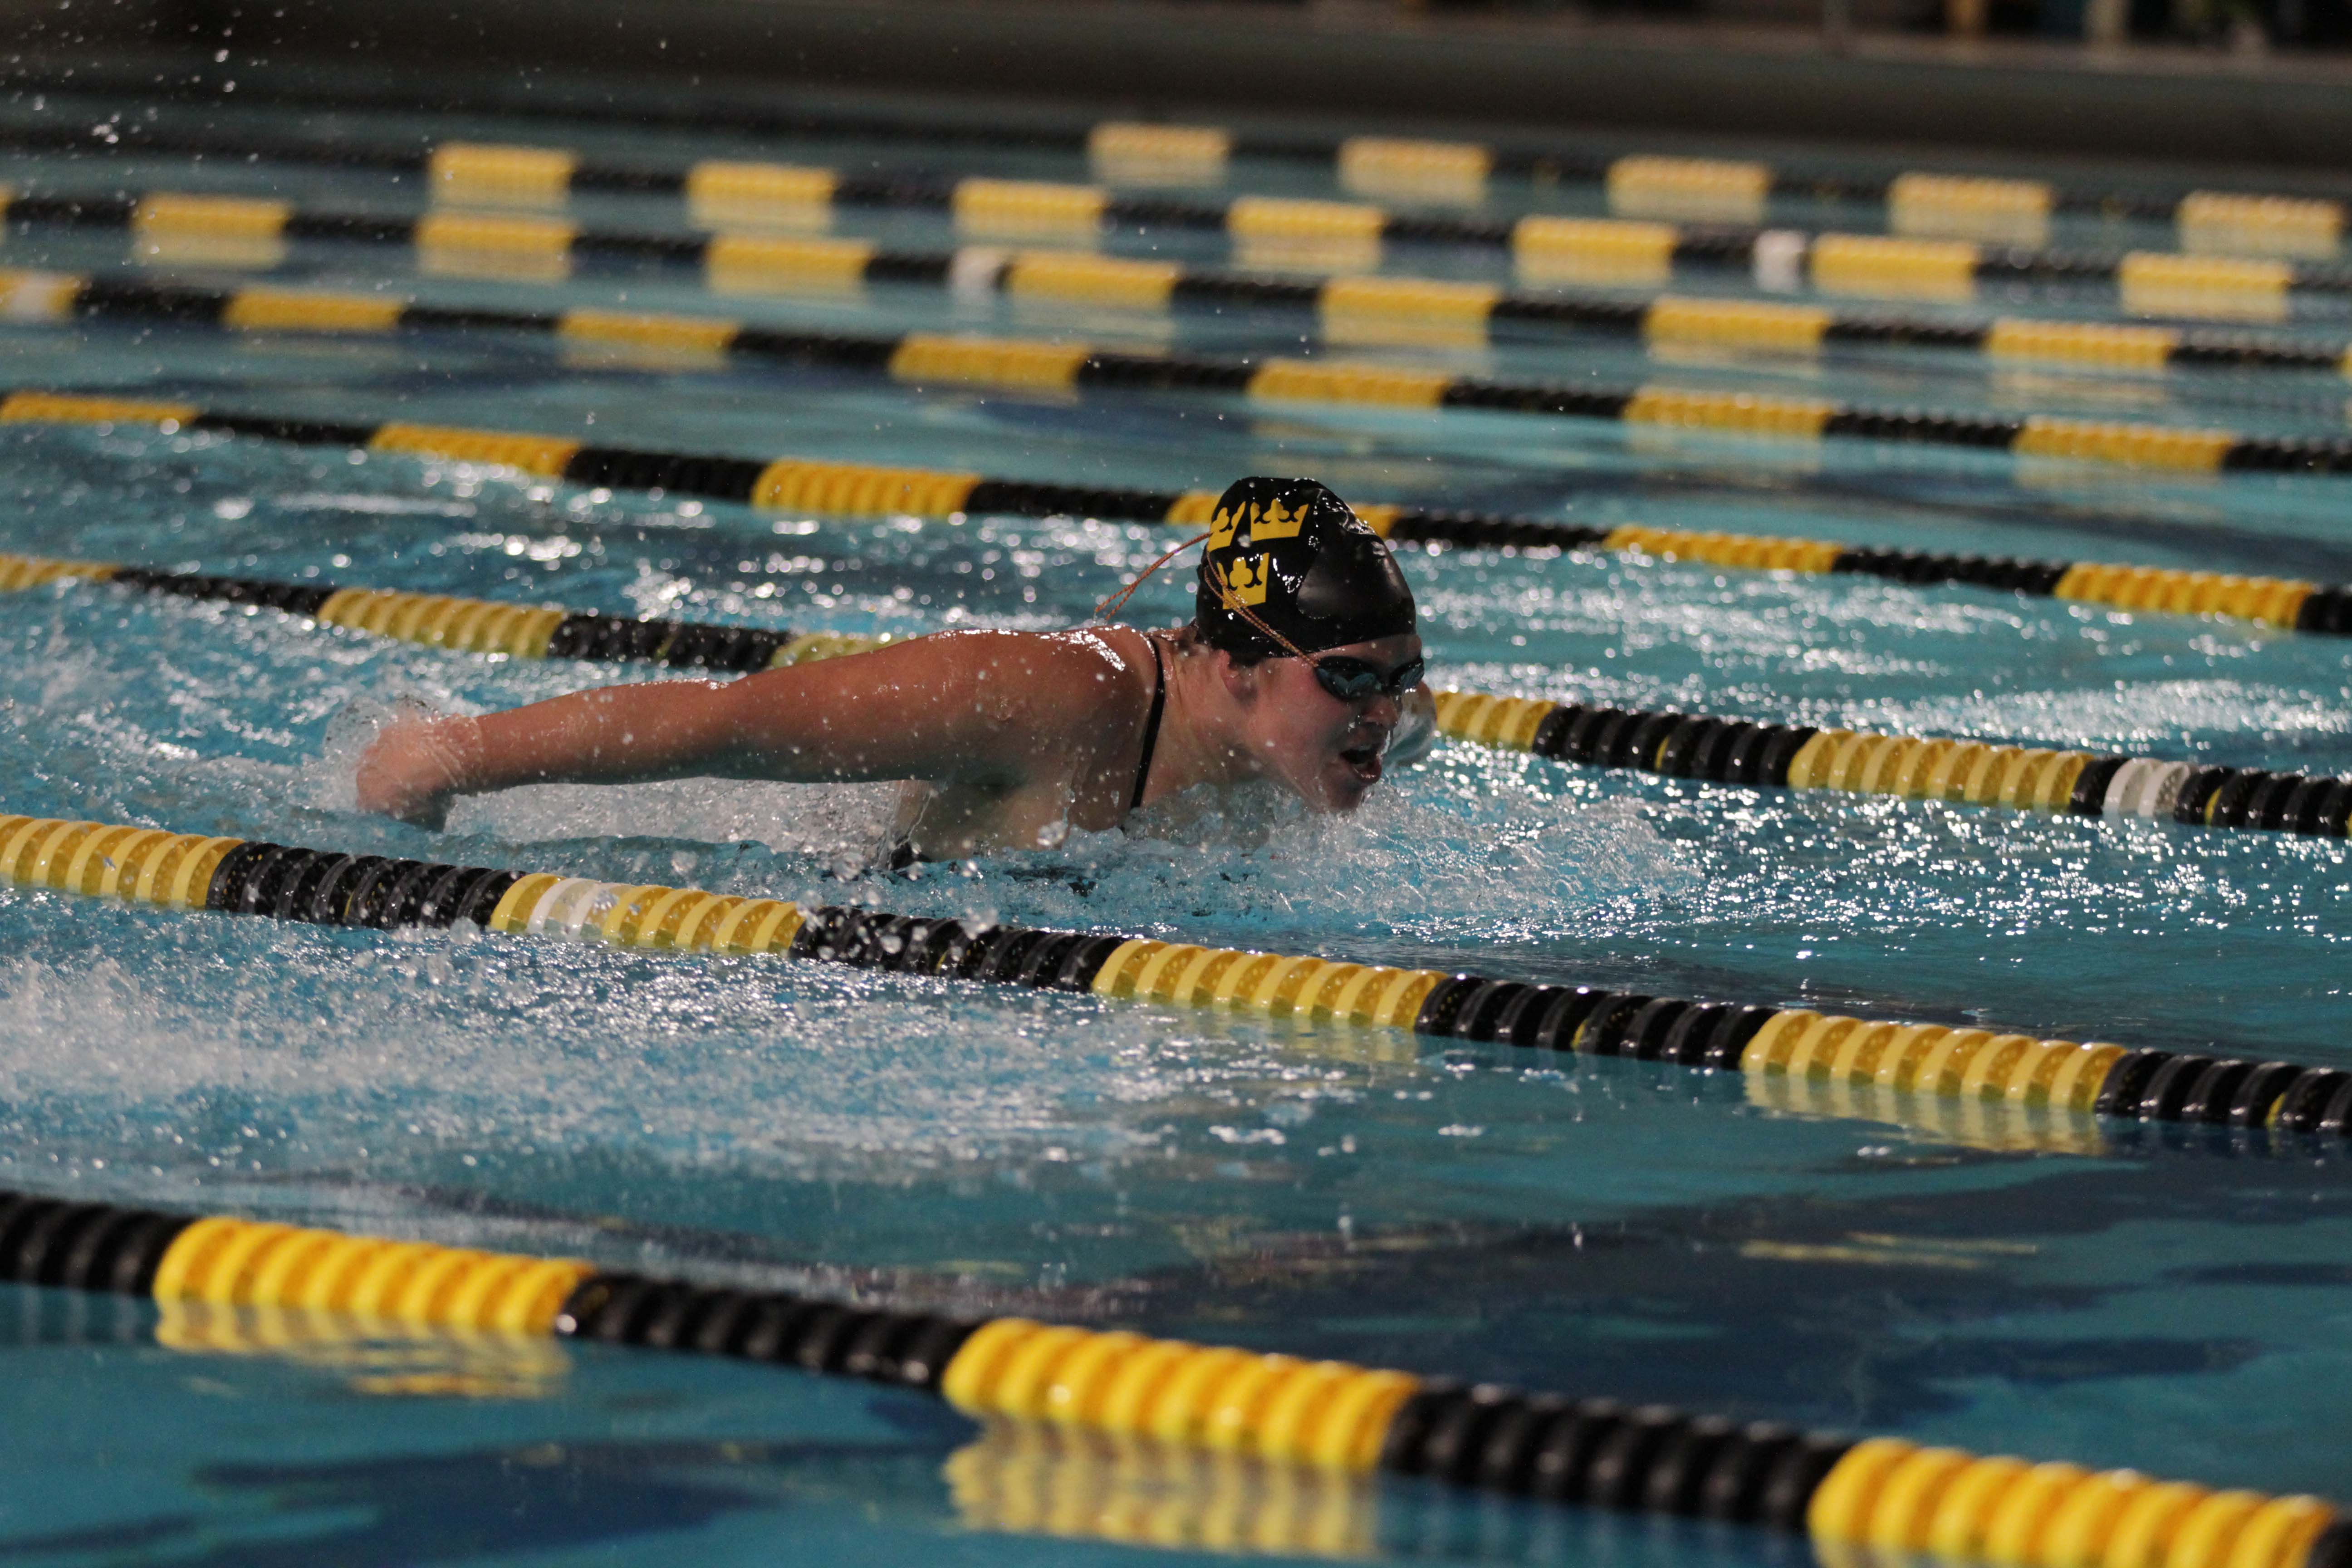 Members of the swimming and diving team kicked off their season with back-to-back weekends of competition. Both the men’s and women’s team tallied first place finishes in multiple events.